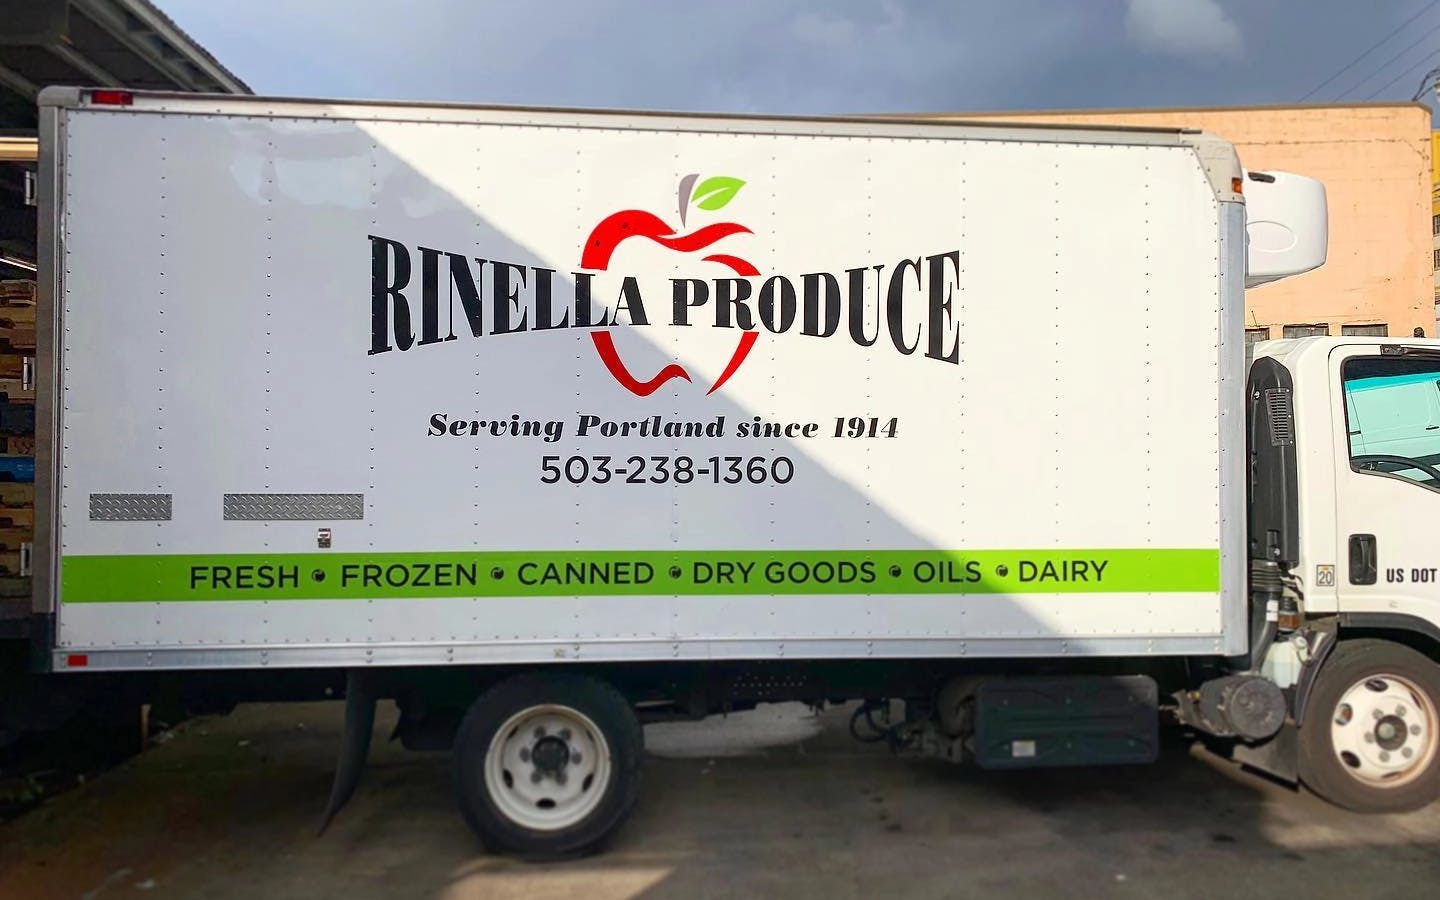 Rinella Produce Delivery Truck